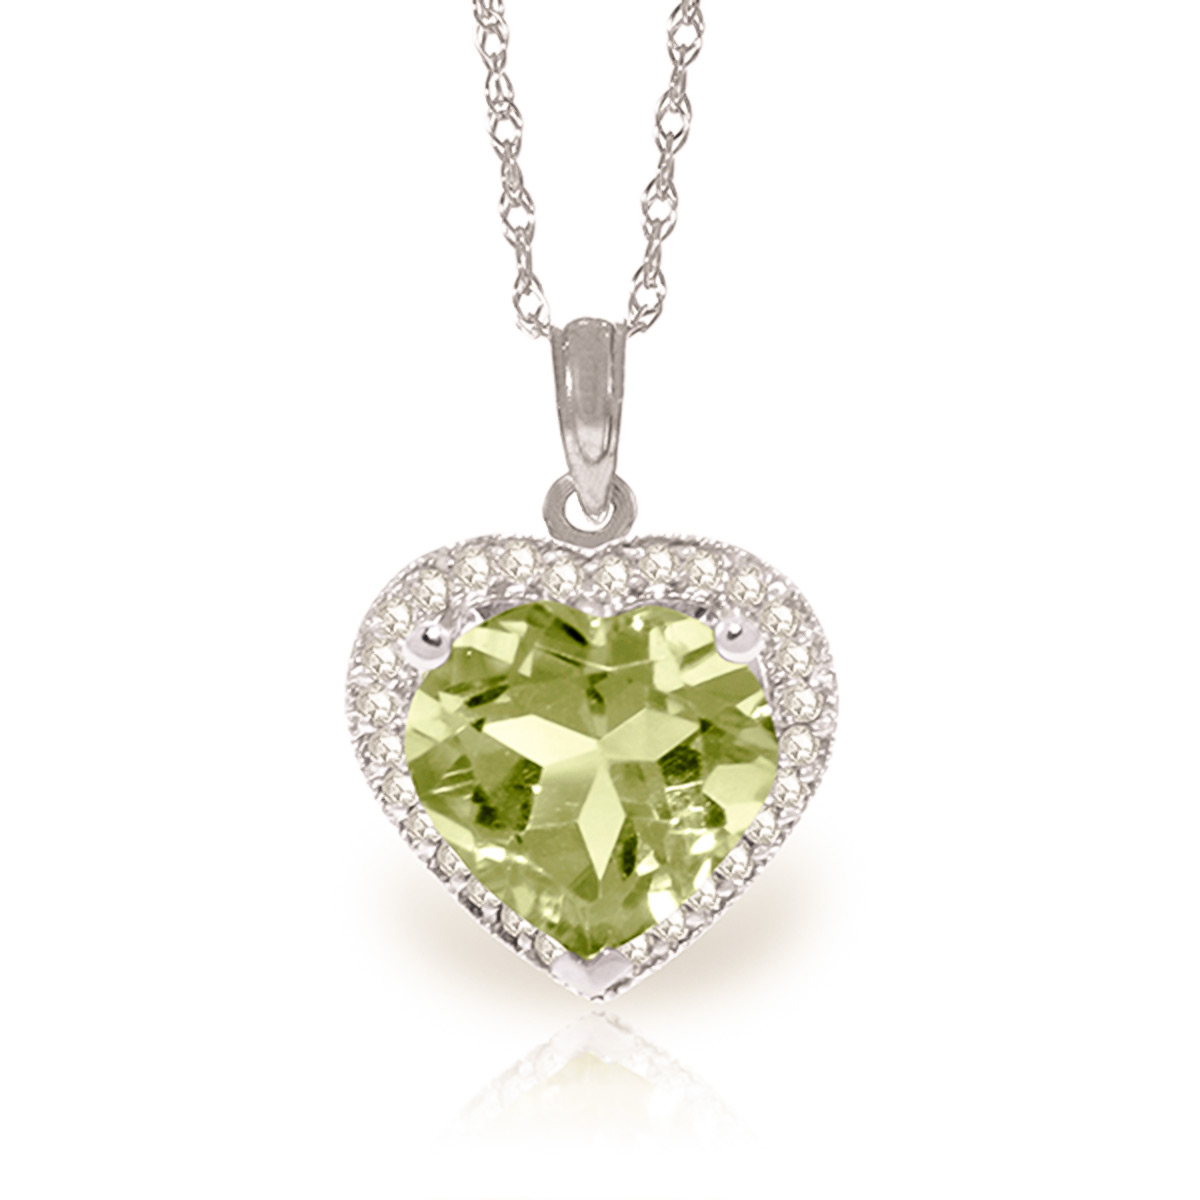 Green Amethyst Halo Pendant Necklace 3.39 ctw in 9ct White Gold